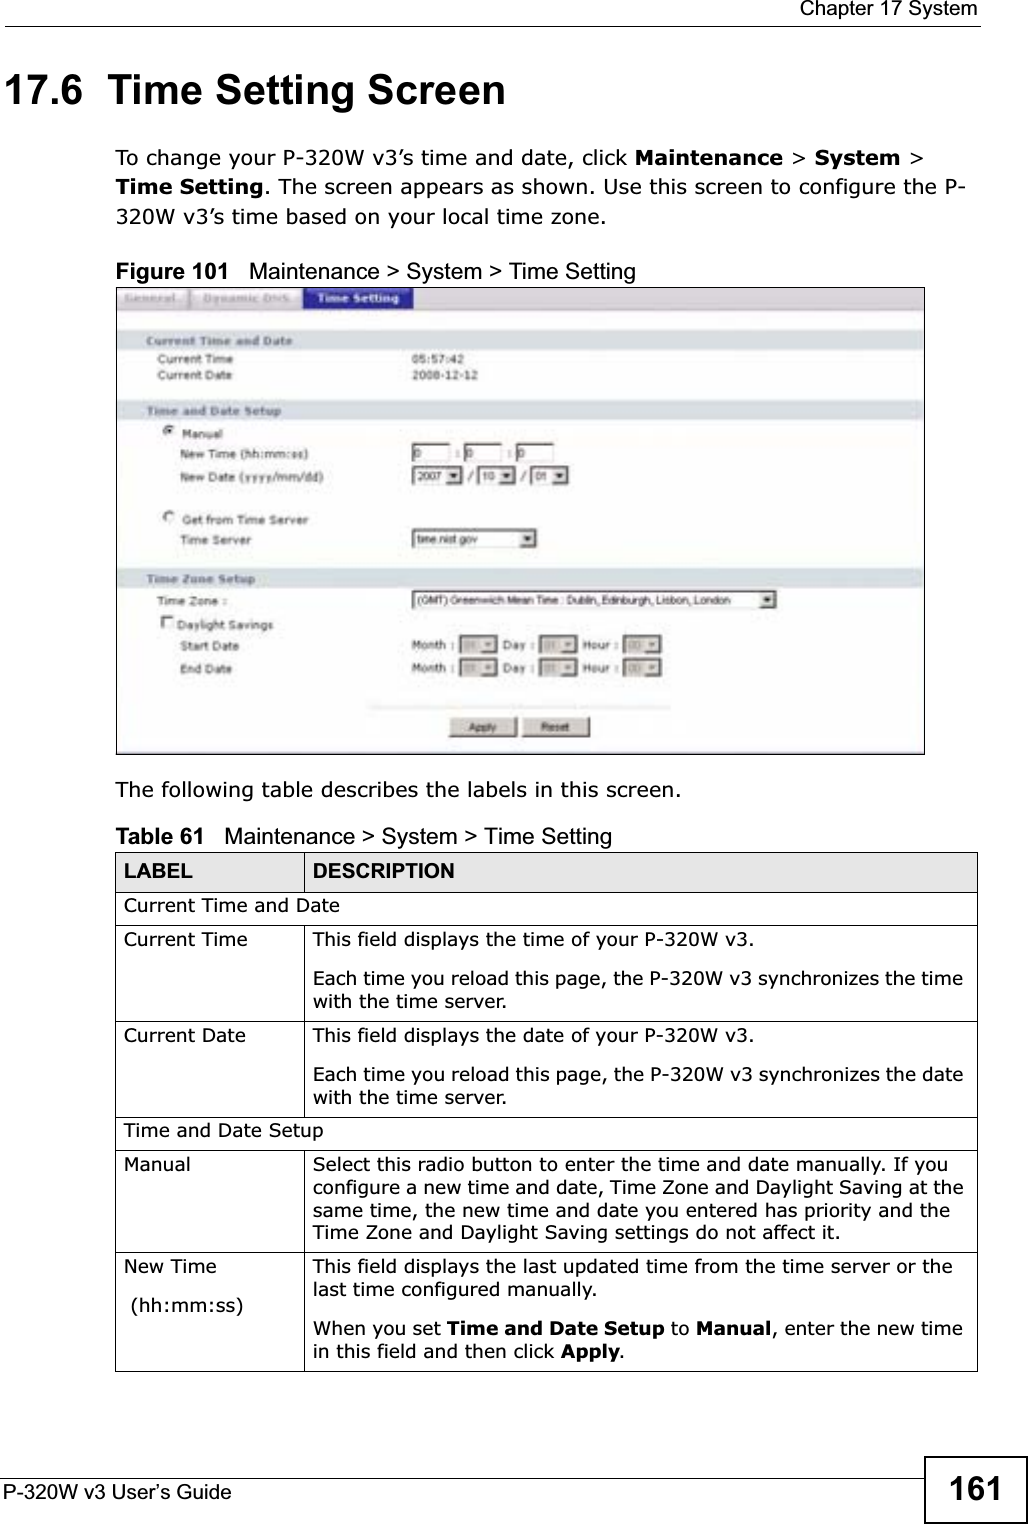  Chapter 17 SystemP-320W v3 User’s Guide 16117.6  Time Setting ScreenTo change your P-320W v3’s time and date, click Maintenance &gt; System &gt; Time Setting. The screen appears as shown. Use this screen to configure the P-320W v3’s time based on your local time zone.Figure 101   Maintenance &gt; System &gt; Time Setting The following table describes the labels in this screen.Table 61   Maintenance &gt; System &gt; Time SettingLABEL DESCRIPTIONCurrent Time and DateCurrent Time  This field displays the time of your P-320W v3.Each time you reload this page, the P-320W v3 synchronizes the time with the time server.Current Date  This field displays the date of your P-320W v3. Each time you reload this page, the P-320W v3 synchronizes the date with the time server.Time and Date SetupManual Select this radio button to enter the time and date manually. If you configure a new time and date, Time Zone and Daylight Saving at the same time, the new time and date you entered has priority and the Time Zone and Daylight Saving settings do not affect it.New Time (hh:mm:ss)This field displays the last updated time from the time server or the last time configured manually.When you set Time and Date Setup to Manual, enter the new time in this field and then click Apply.